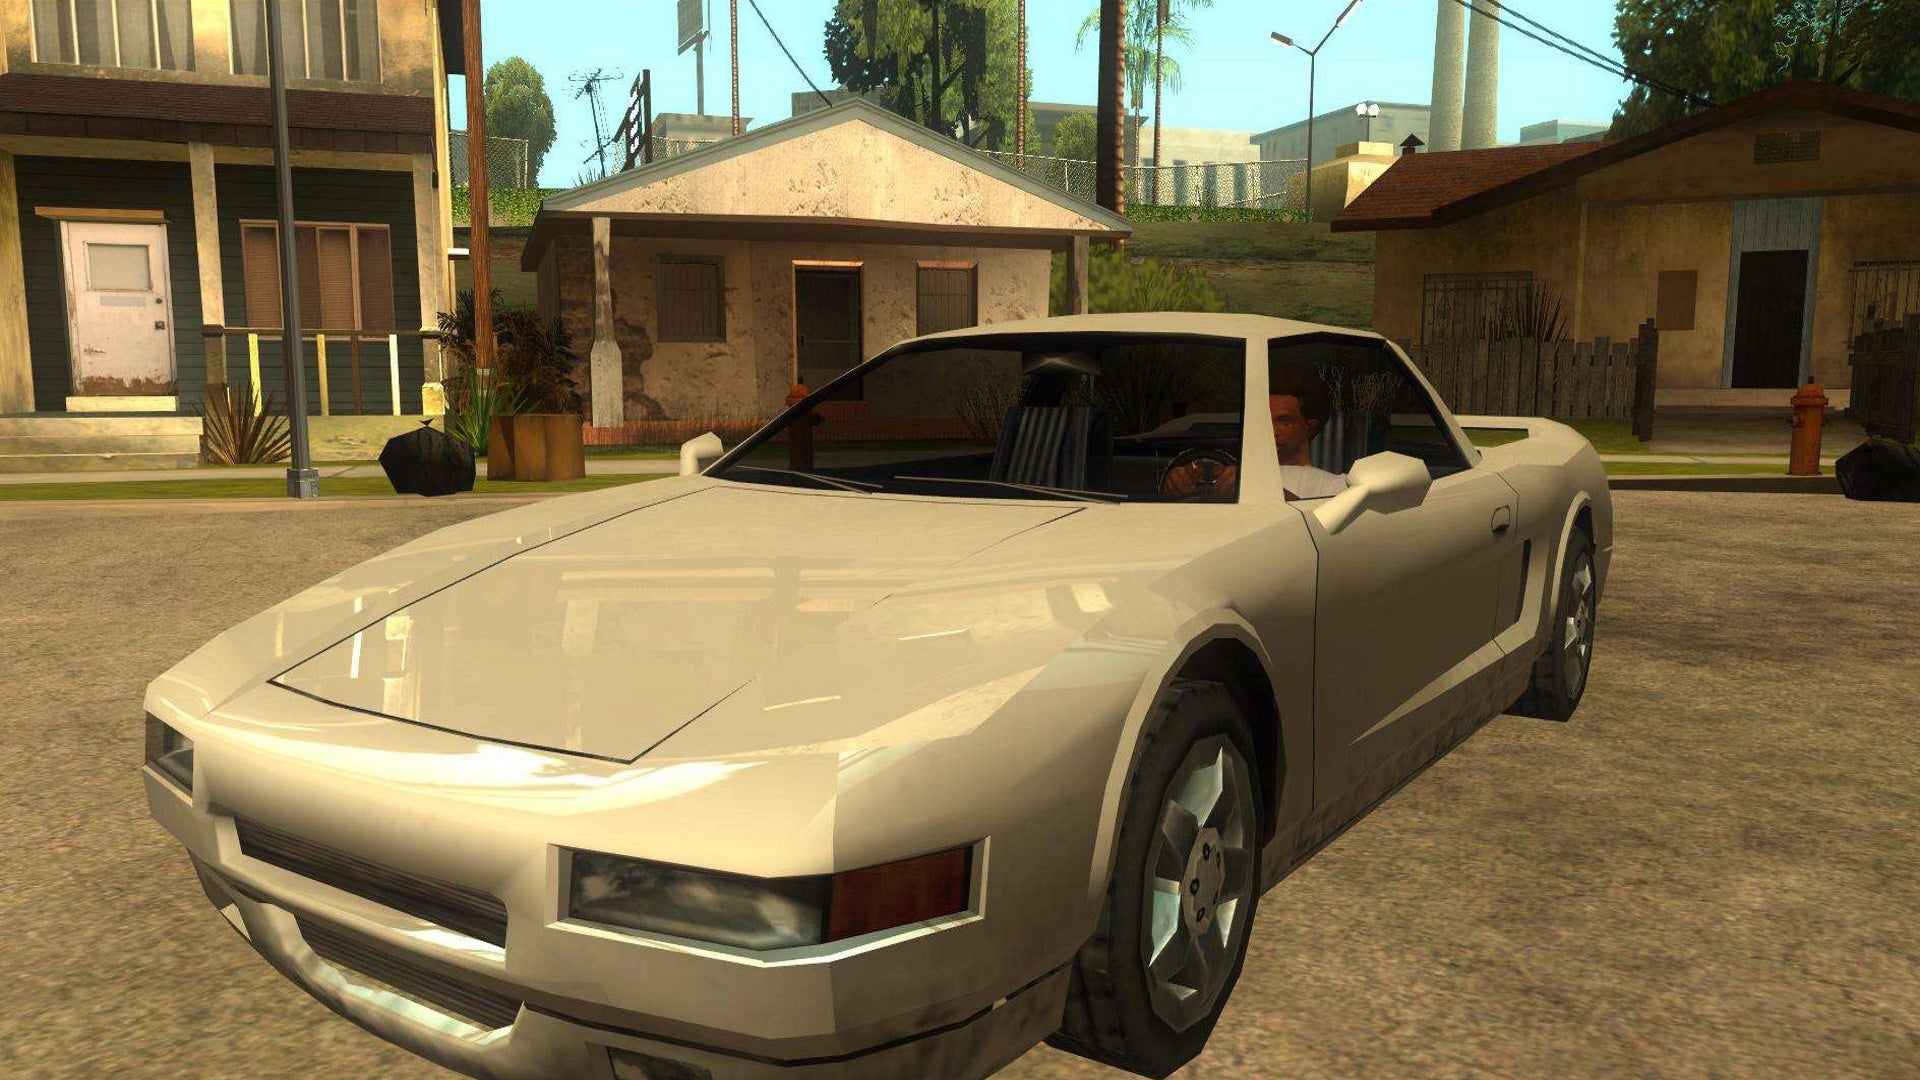 Image for The fastest cars in GTA San Andreas - Infernus, Cheetah, and more